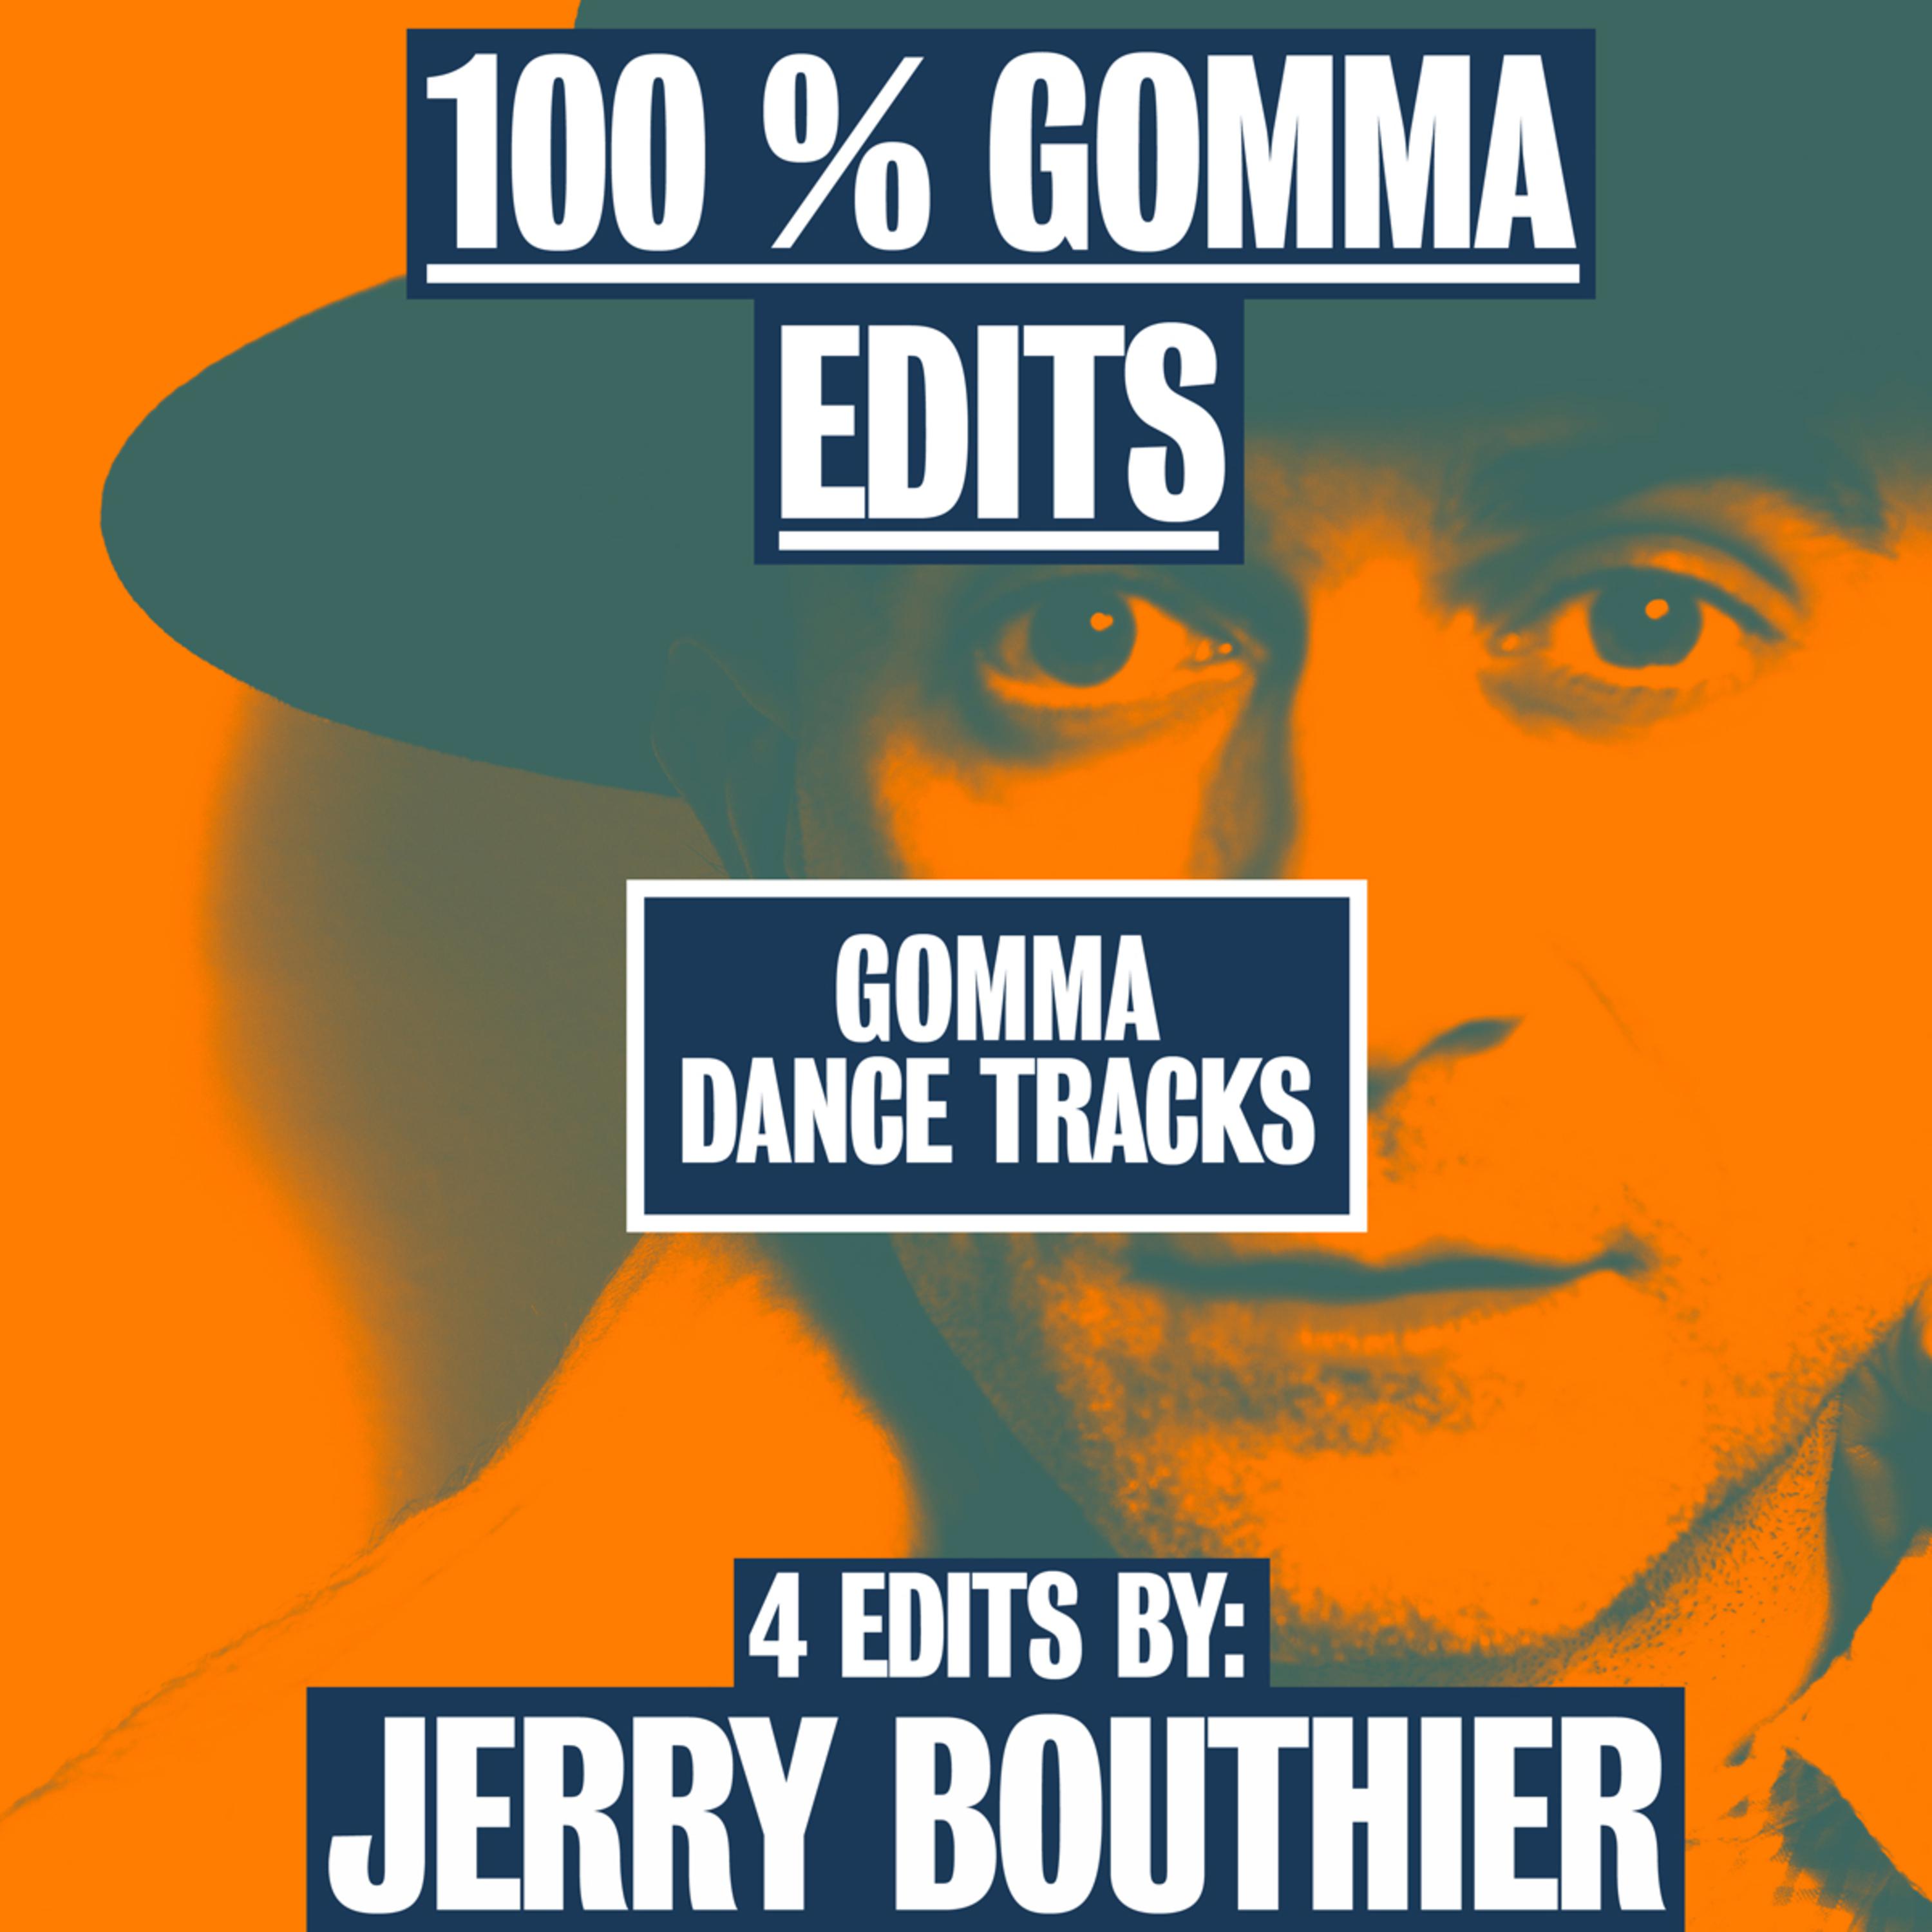 100% Gomma Edits by Jerry Bouthier